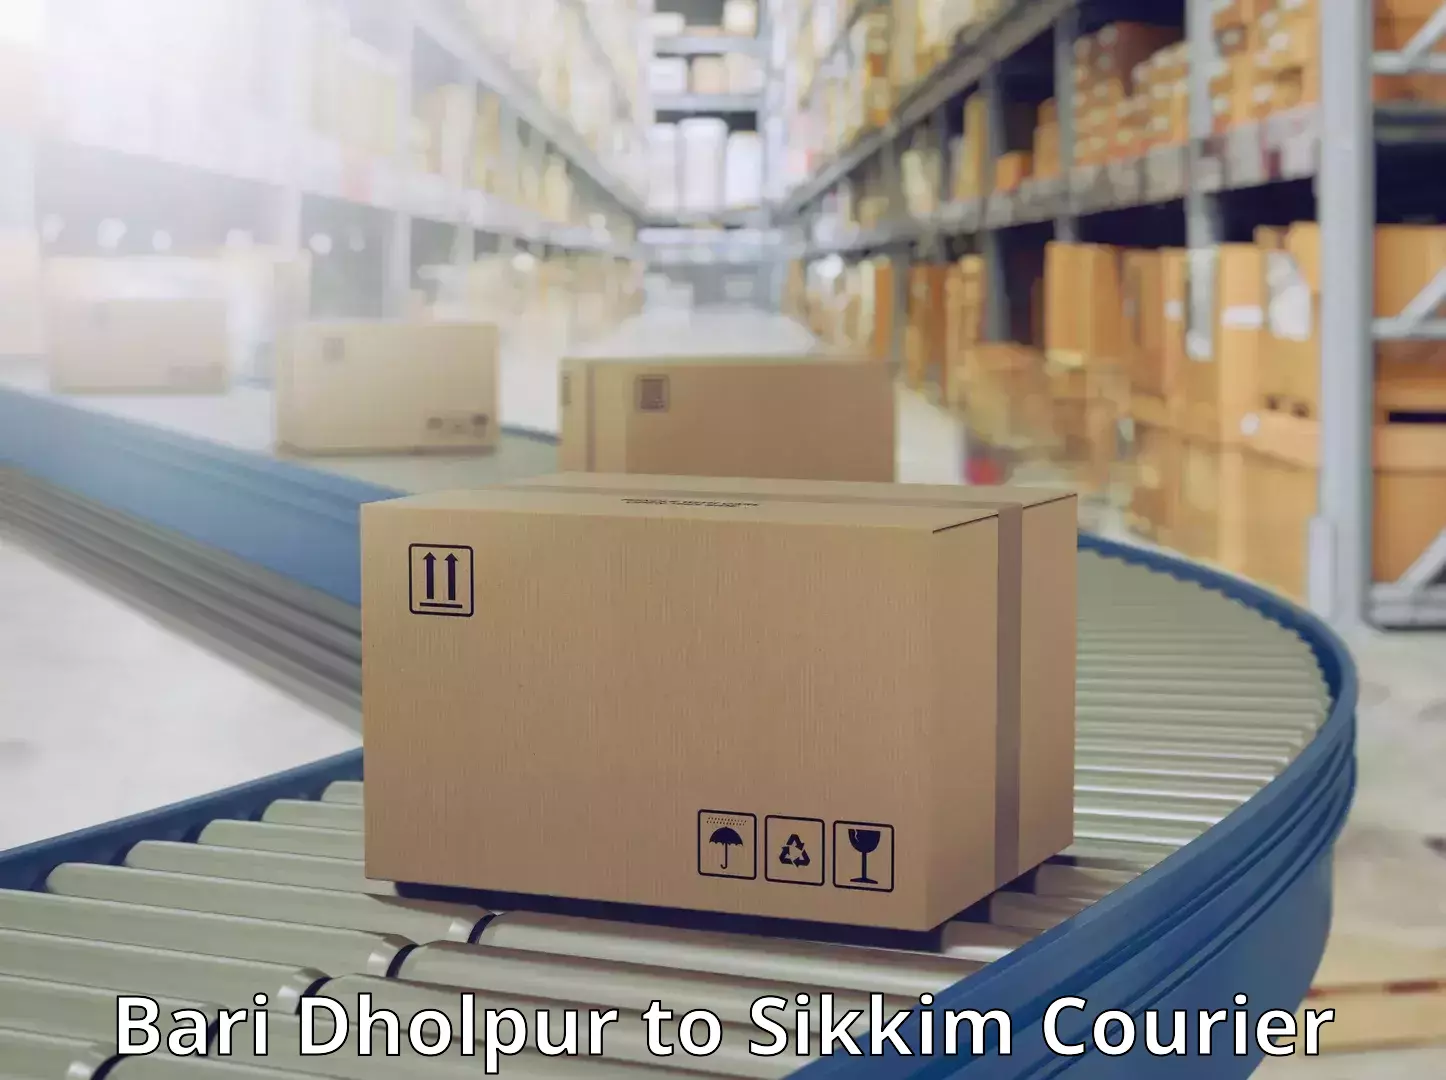 Advanced parcel tracking Bari Dholpur to Sikkim